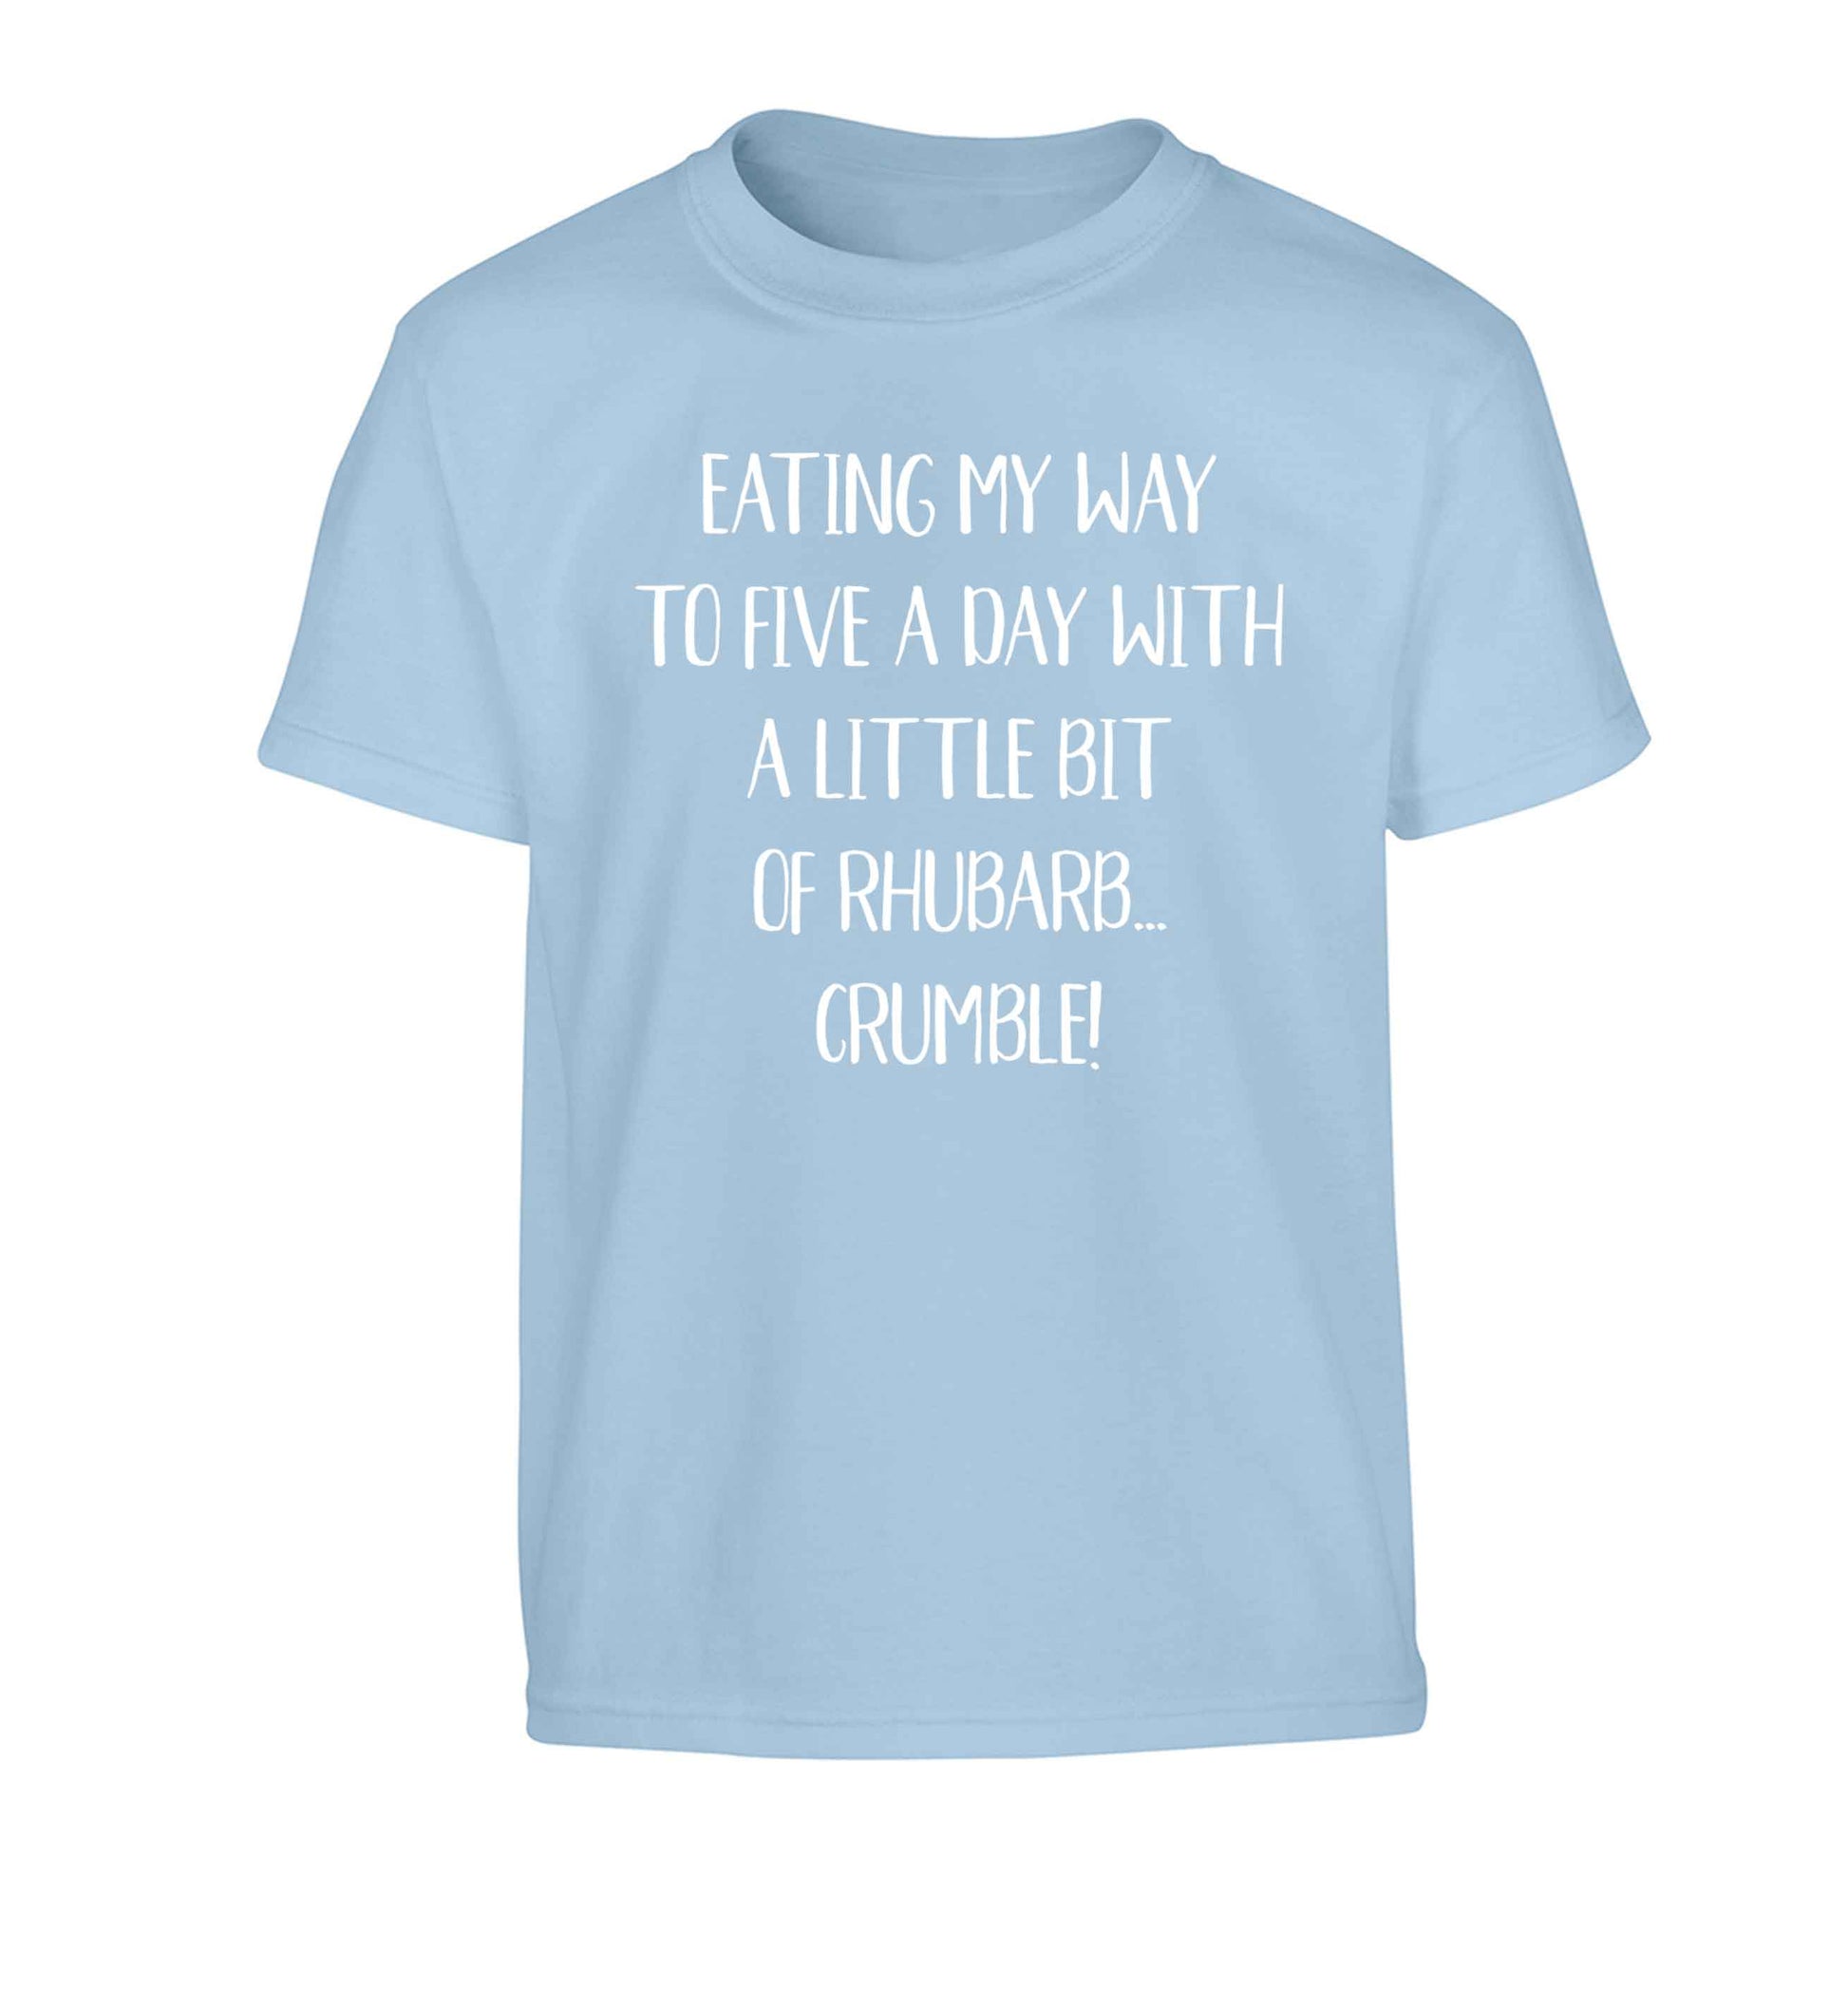 Eating my way to five a day with a little bit of rhubarb crumble Children's light blue Tshirt 12-13 Years